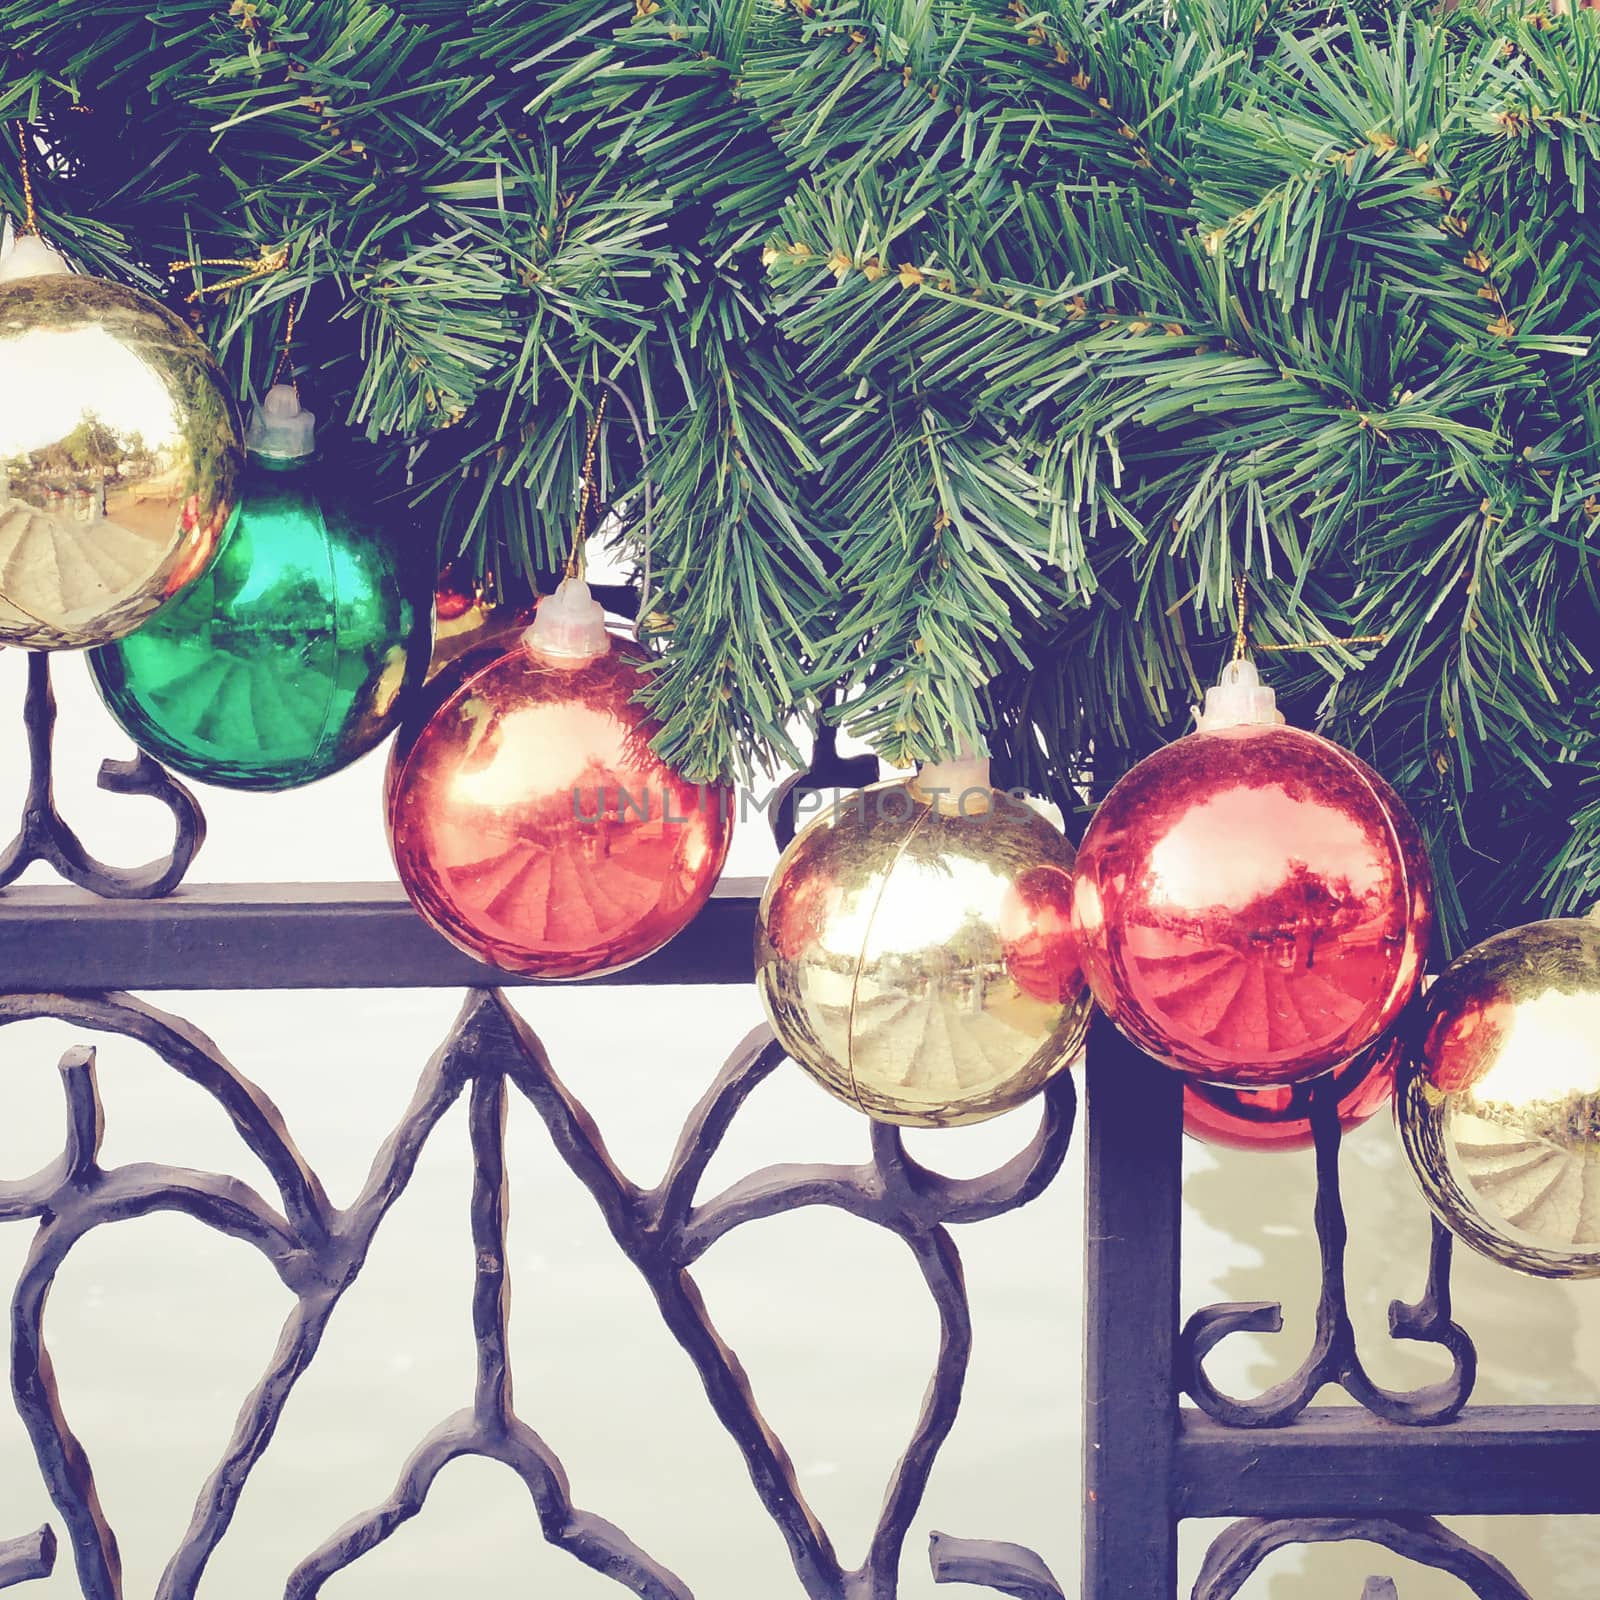 Christmas balls hanging on fir tree with retro filter effect by nuchylee